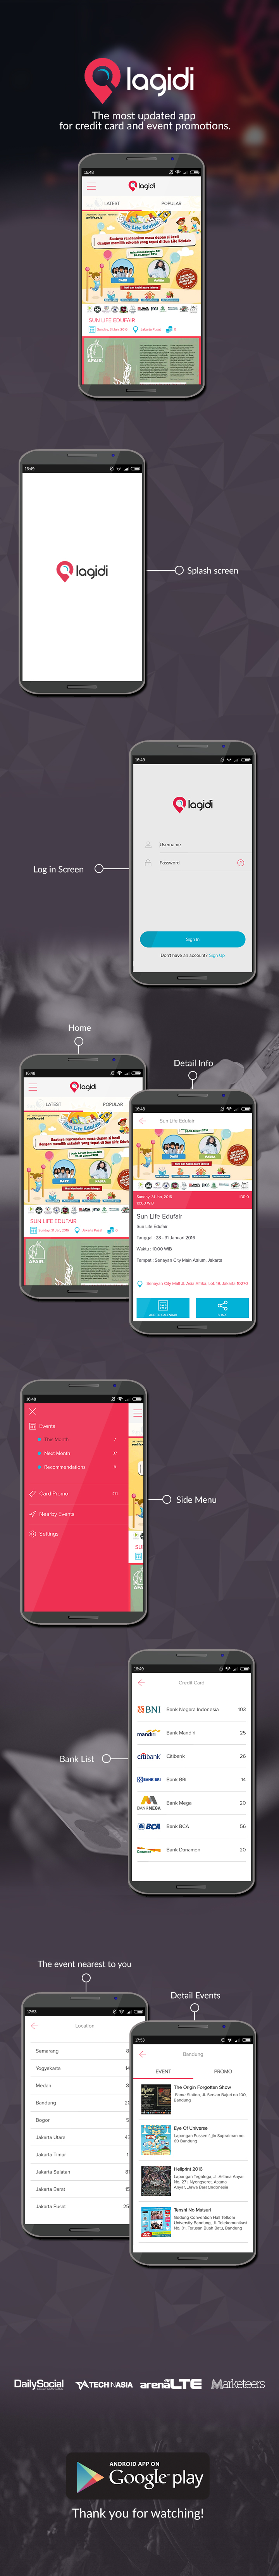 UI ux mobile Events android application